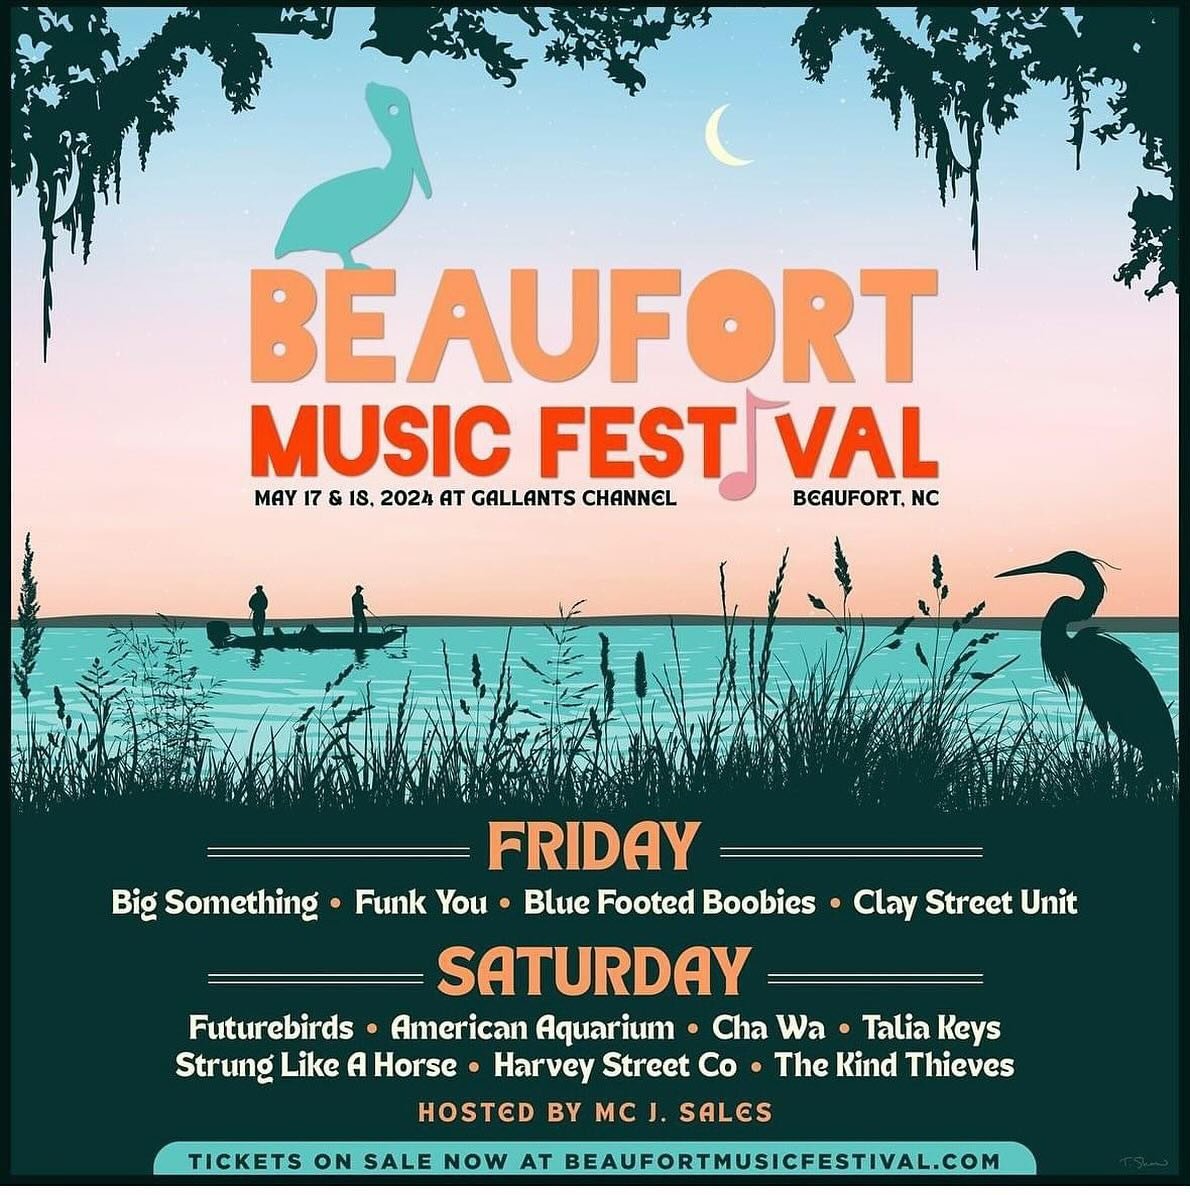 We&rsquo;re excited to a featured vendor at the @beaufortmusicfestival this weekend. Look for our music-inspired and Camp Morehead apparel and accessories. Preview our goods at DrifterMerch.com/shop.